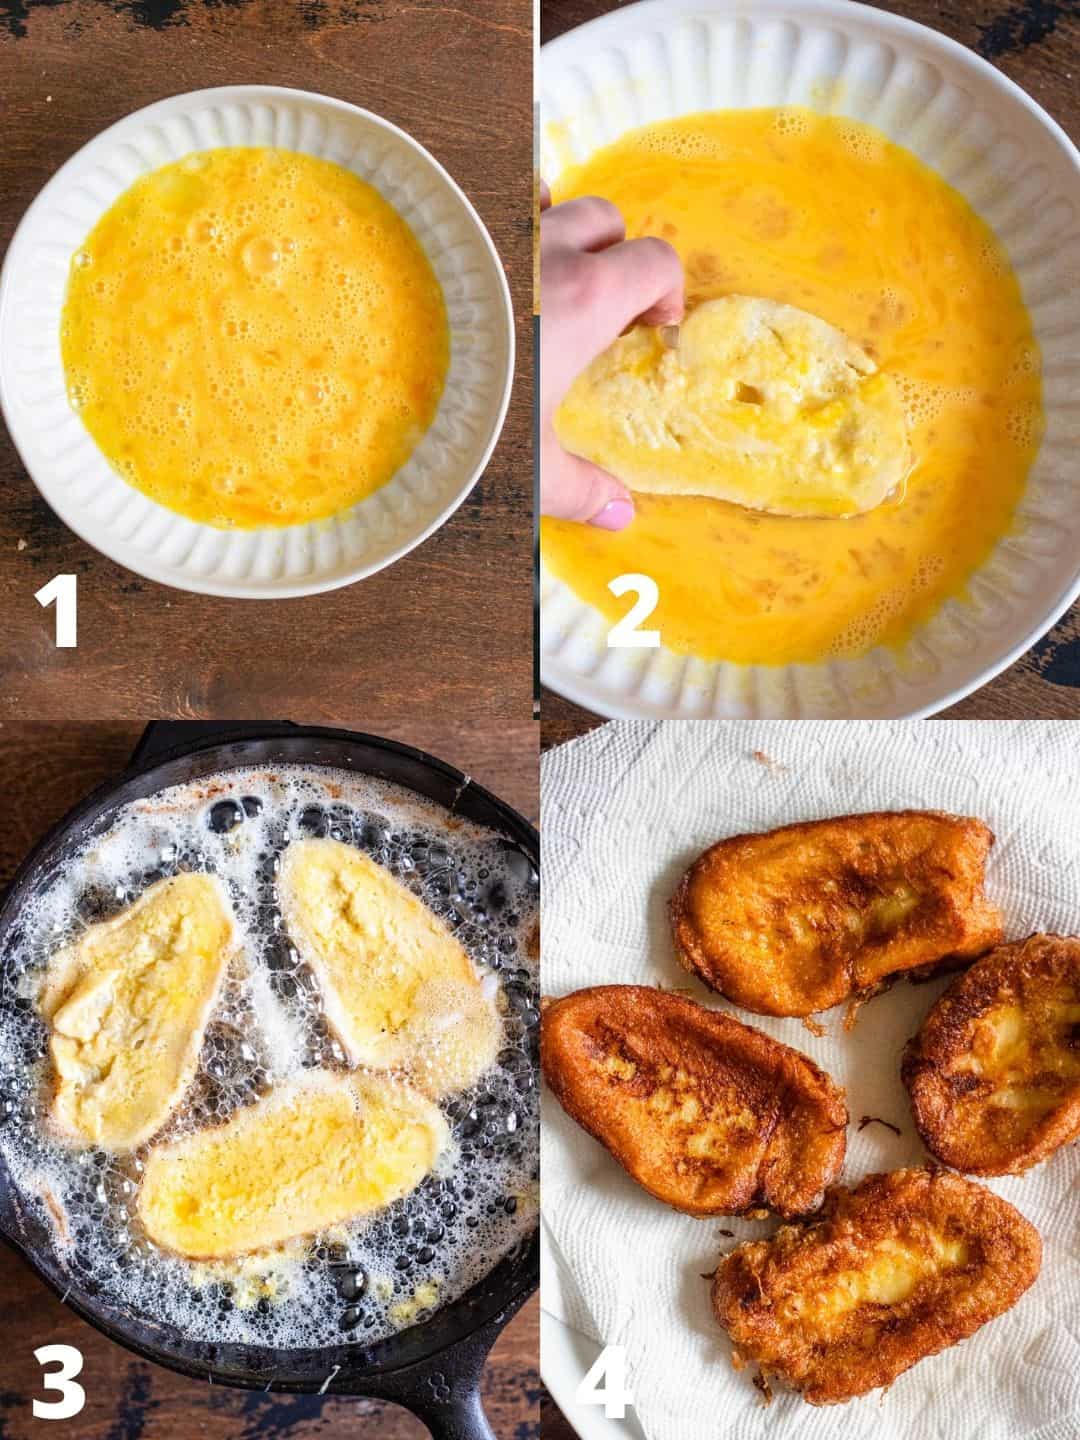 A collage of 4 pictures demonstrating how to make Torrijas by taking the milk soaked bread, dunking it in egg mixture and frying it, then allow it to drain on a paper towel lined plate. 